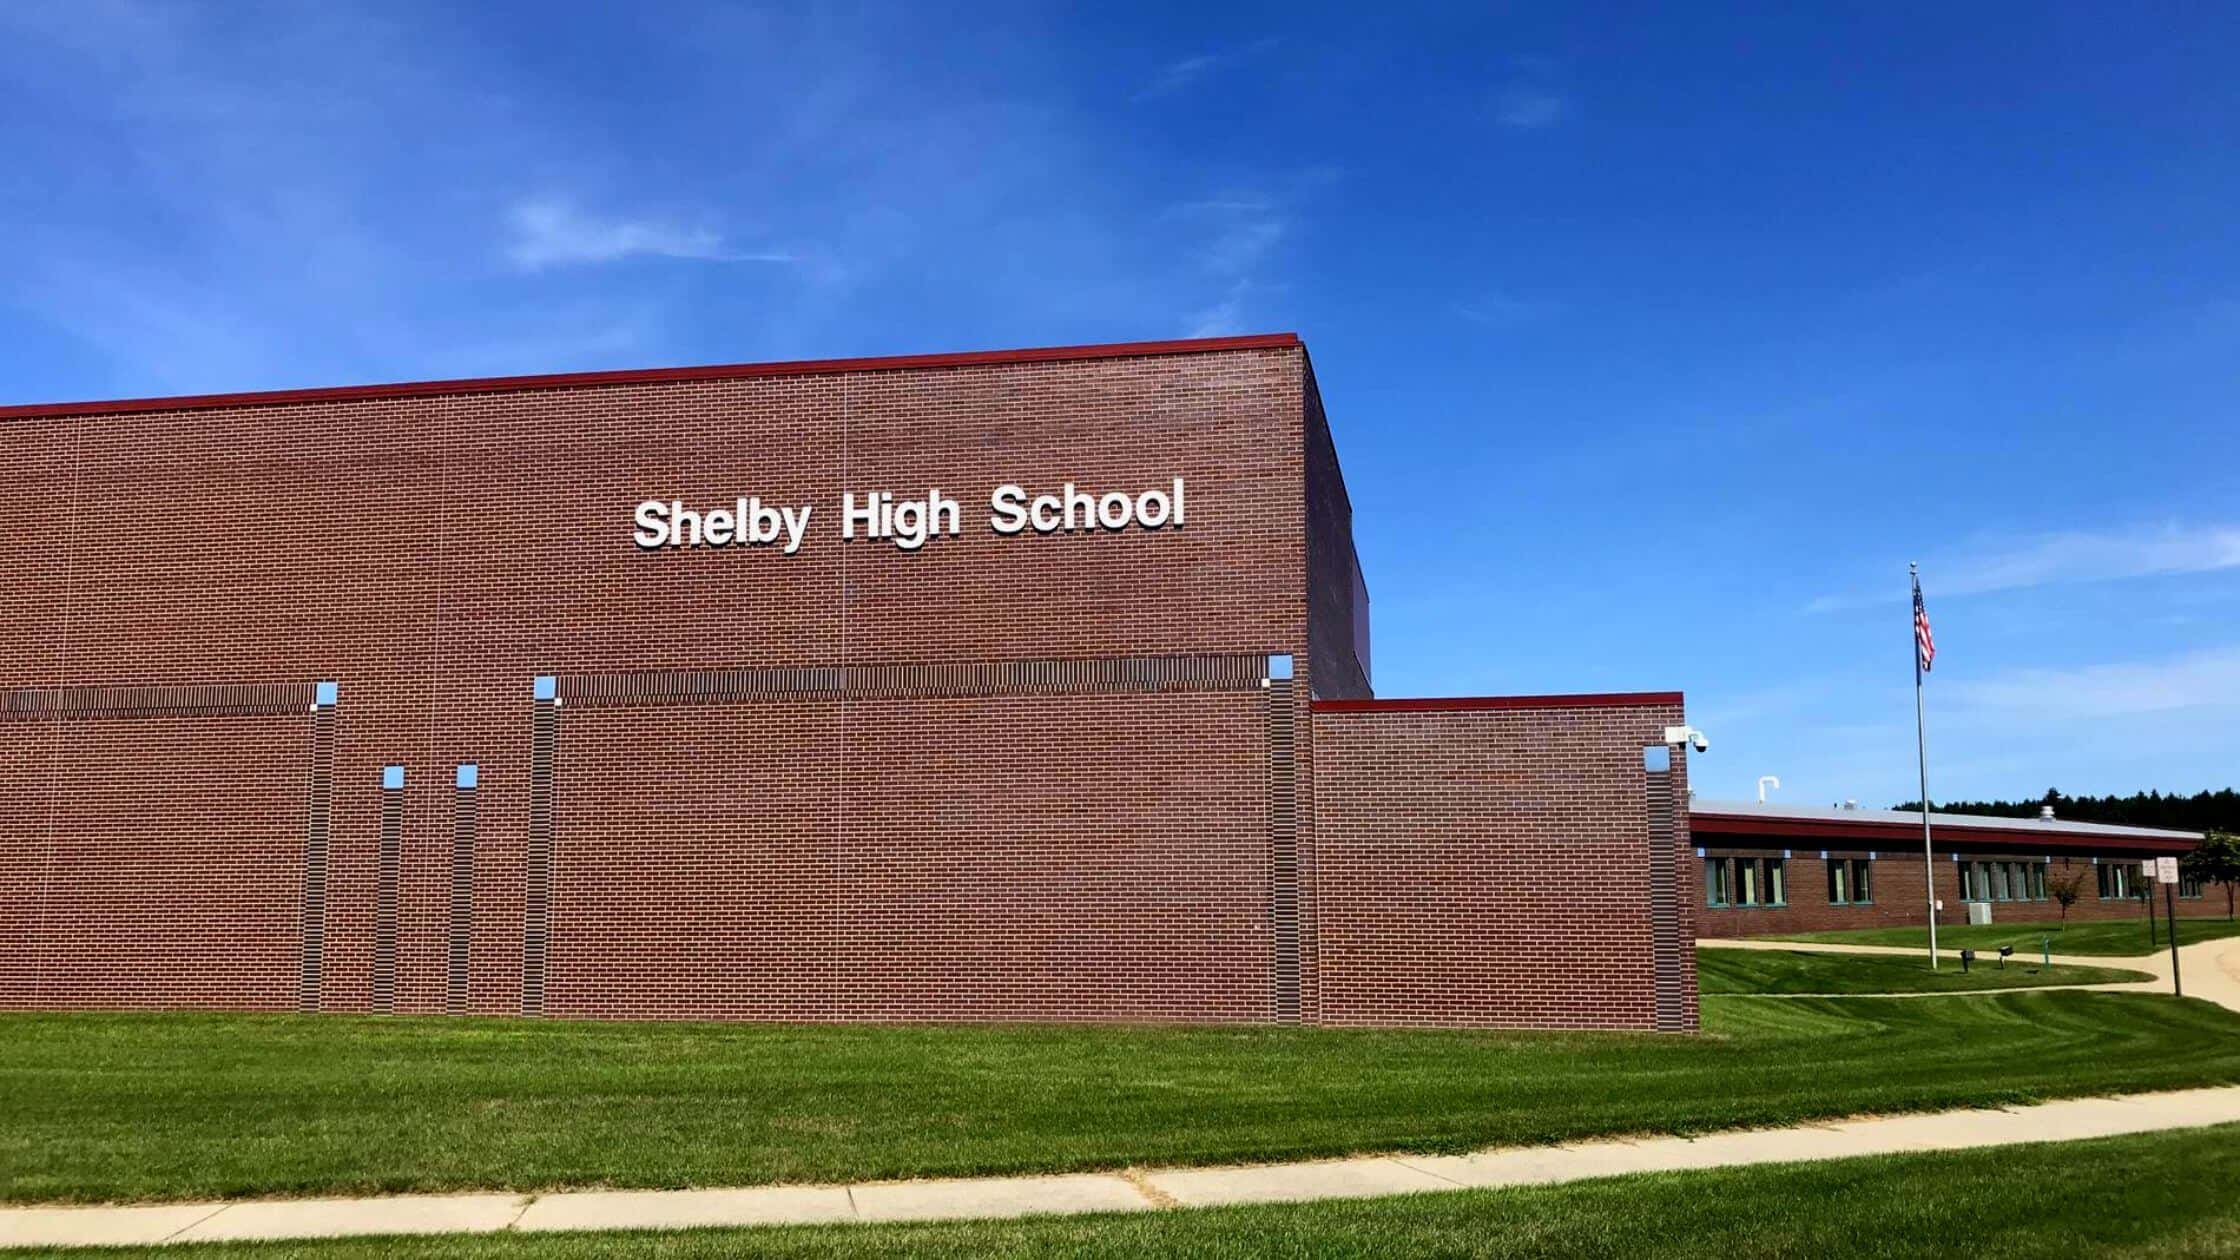 Shelby People Speak Out Against The Transgender Bathroom Policy In Schools